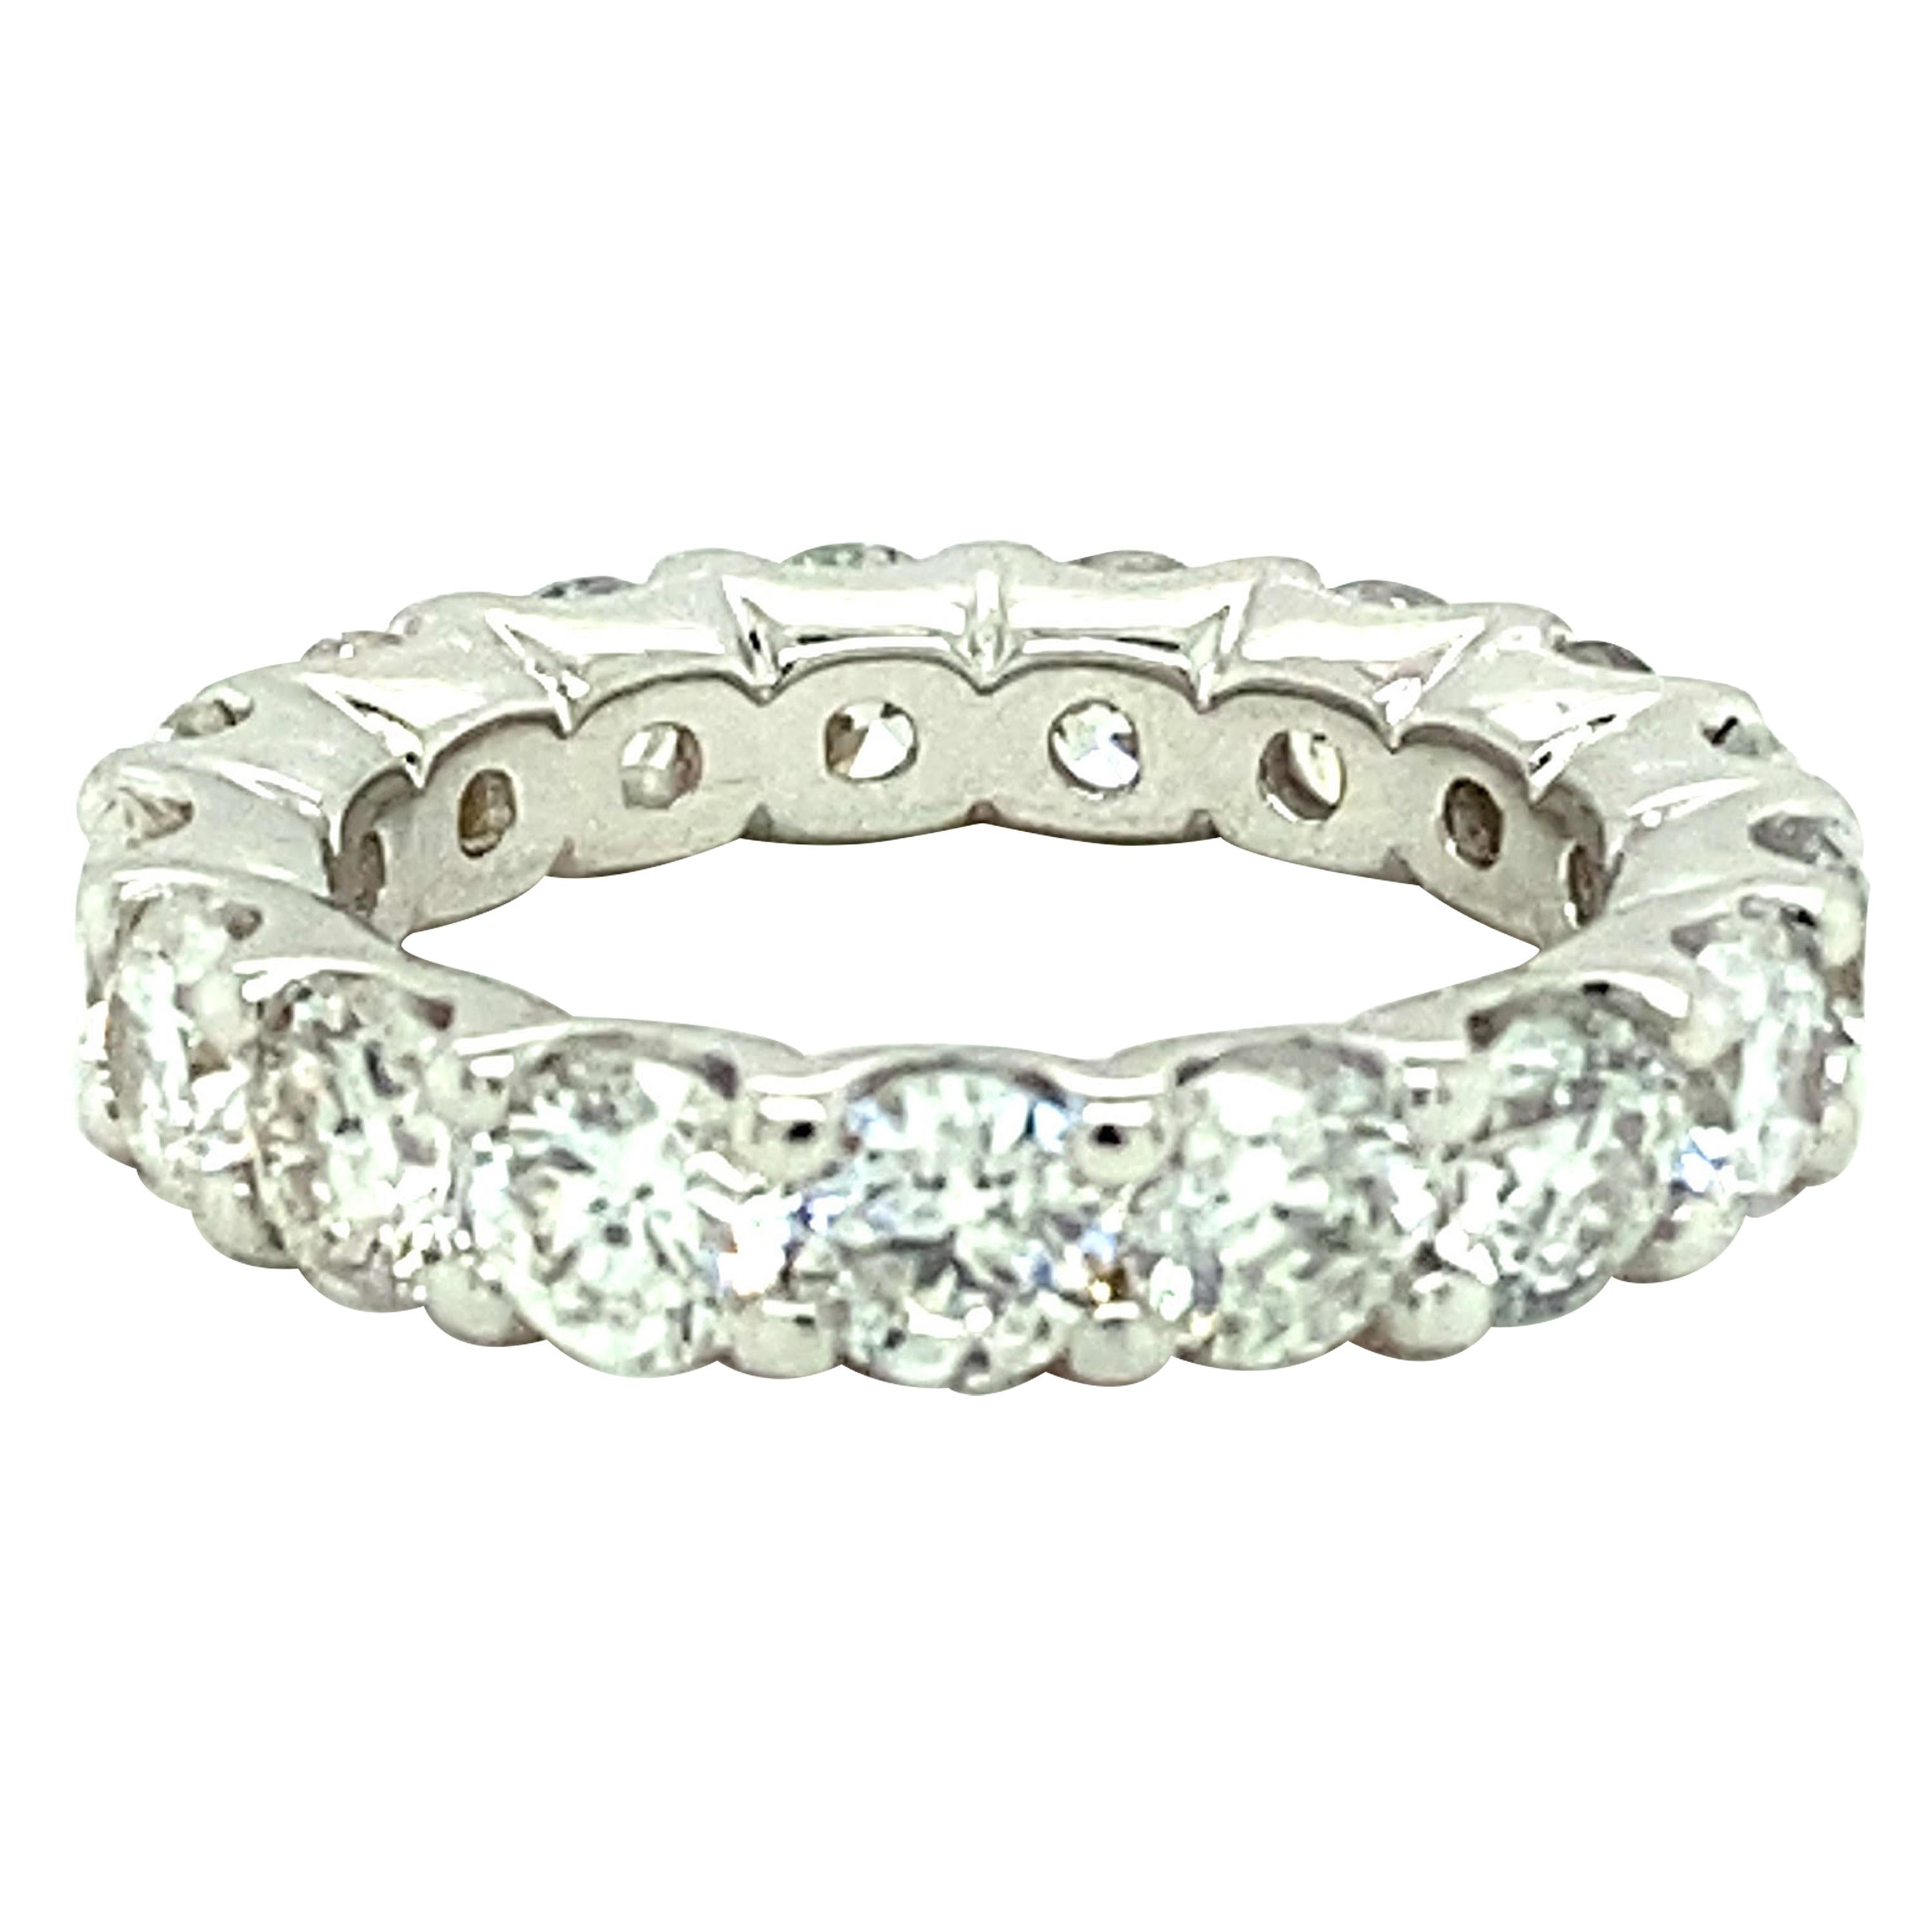 5.20 Ct Diamond Eternity Band Ring in 18kt White Gold For Sale